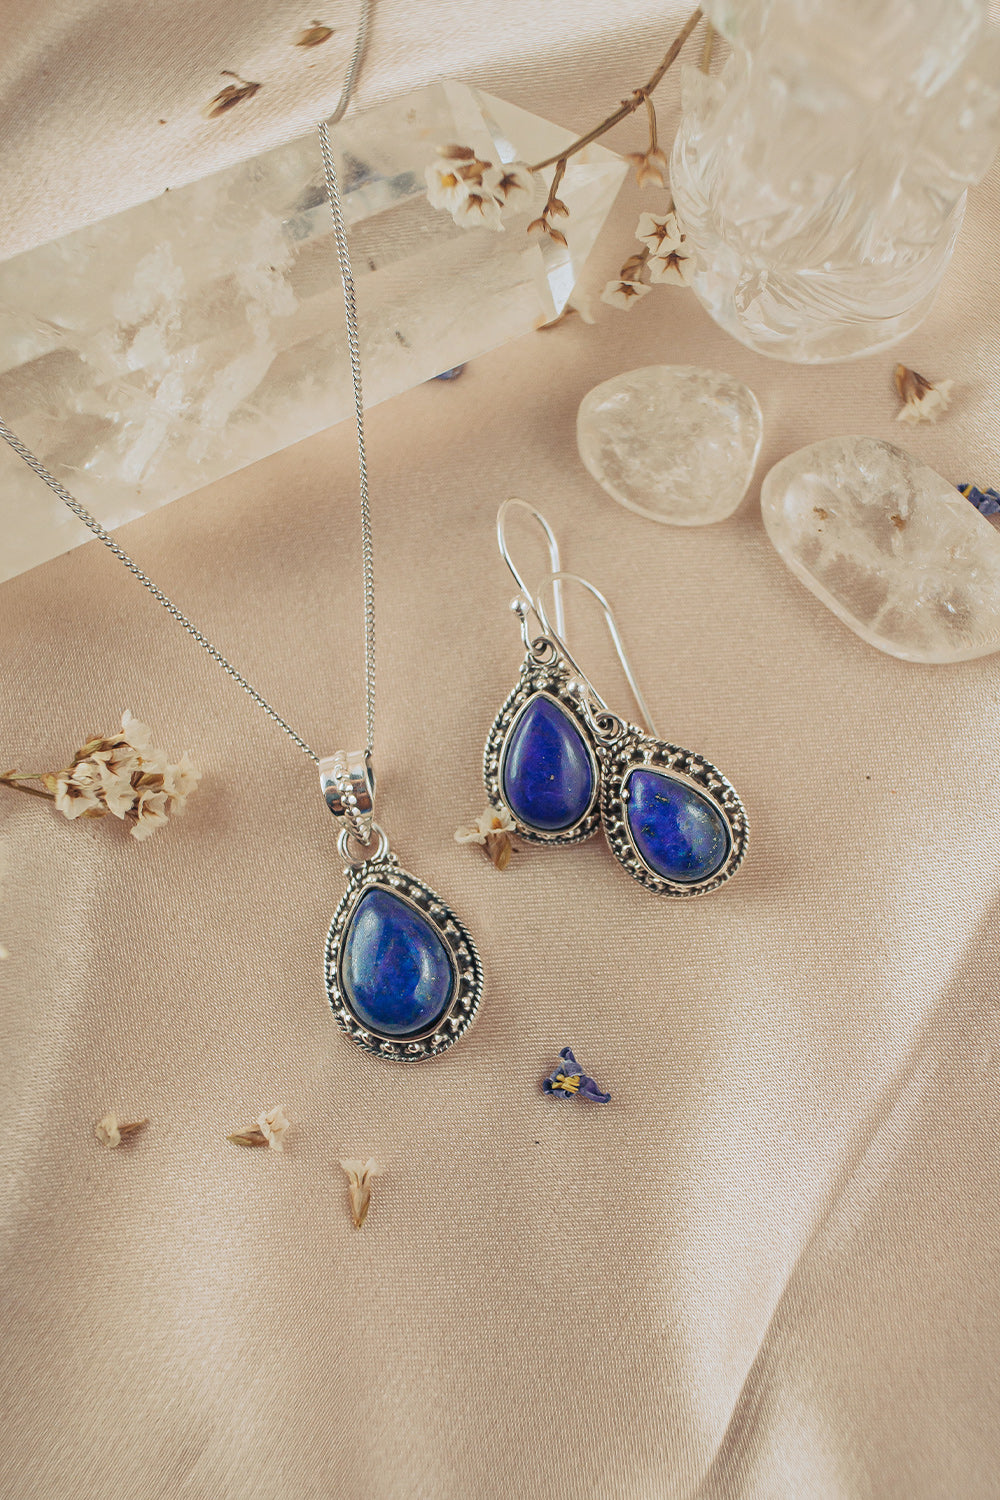 Sivalya Lapis Lazuli Necklace and Earrings Set Sterling Silver - Amalfi